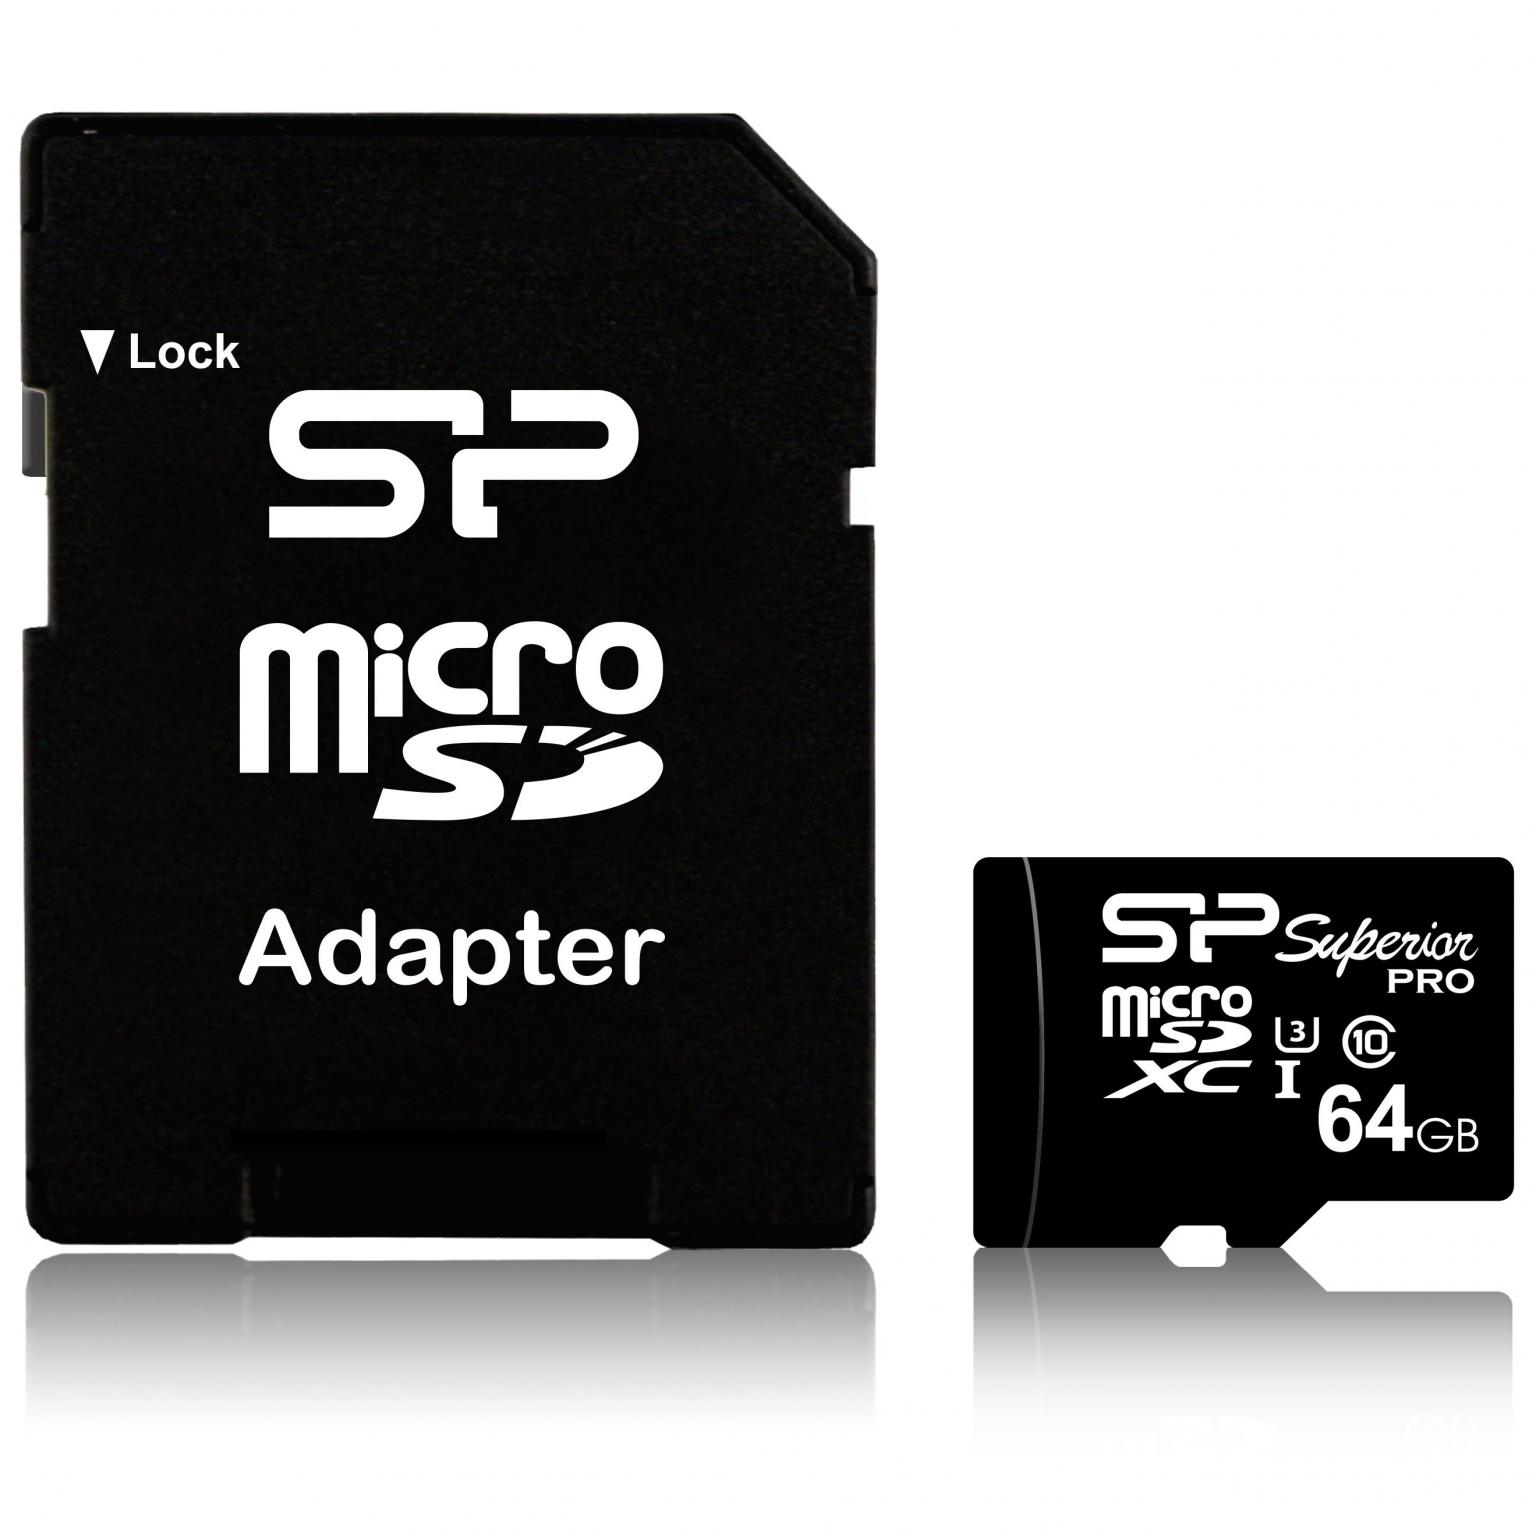 Micro SDHC geheugenkaart - 64 GB - Silicon Power